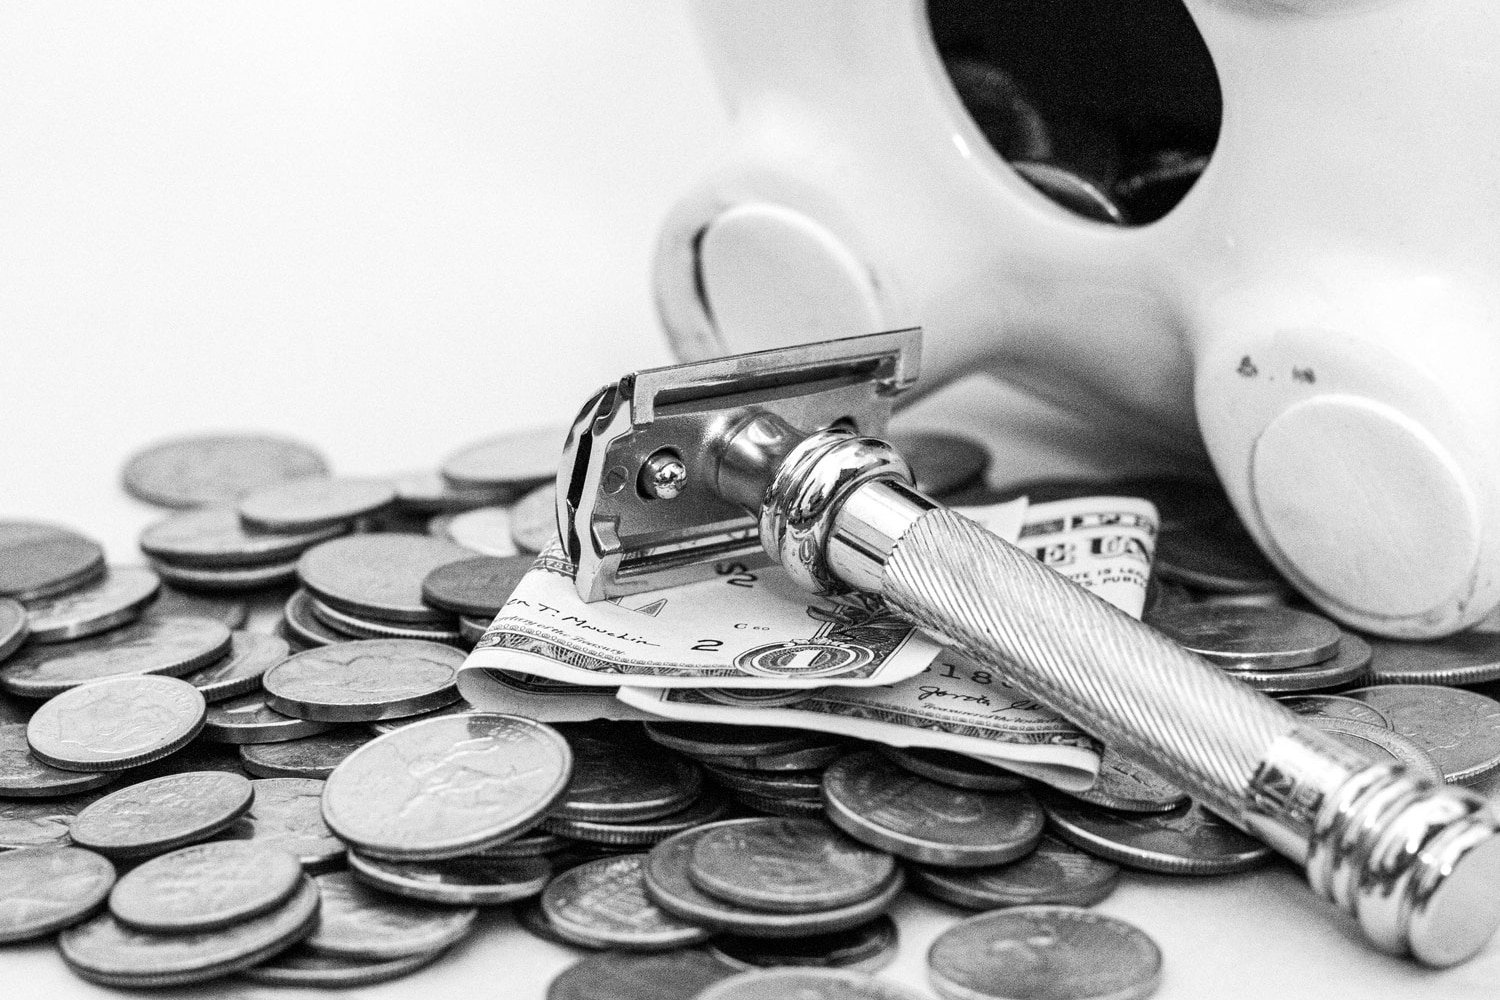 safety razor on top of money with piggy bank in background